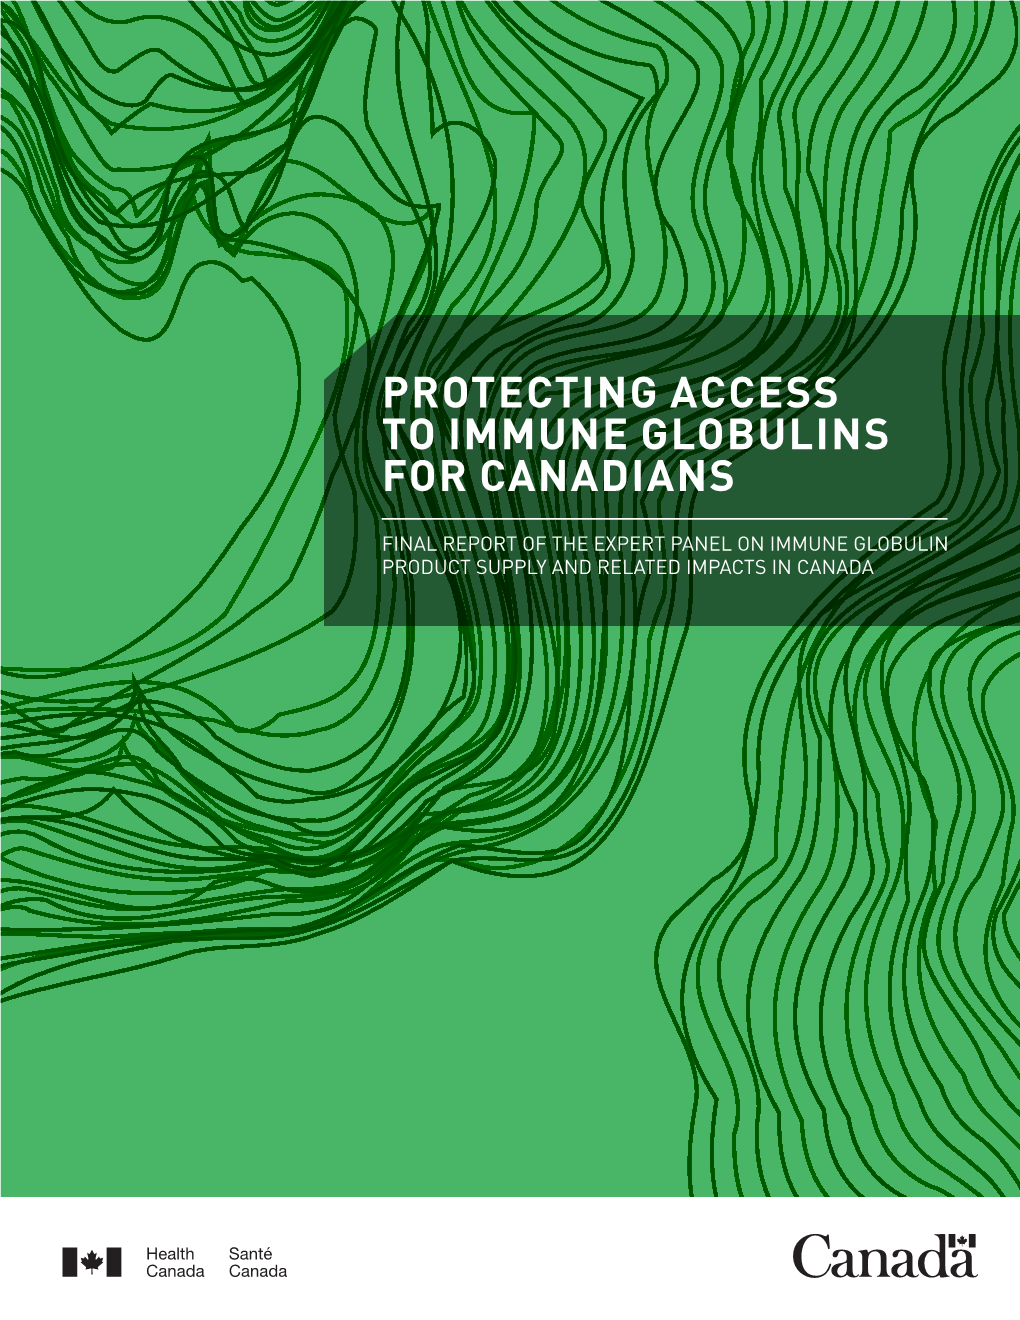 Protecting Access to Immune Globulins for Canadians